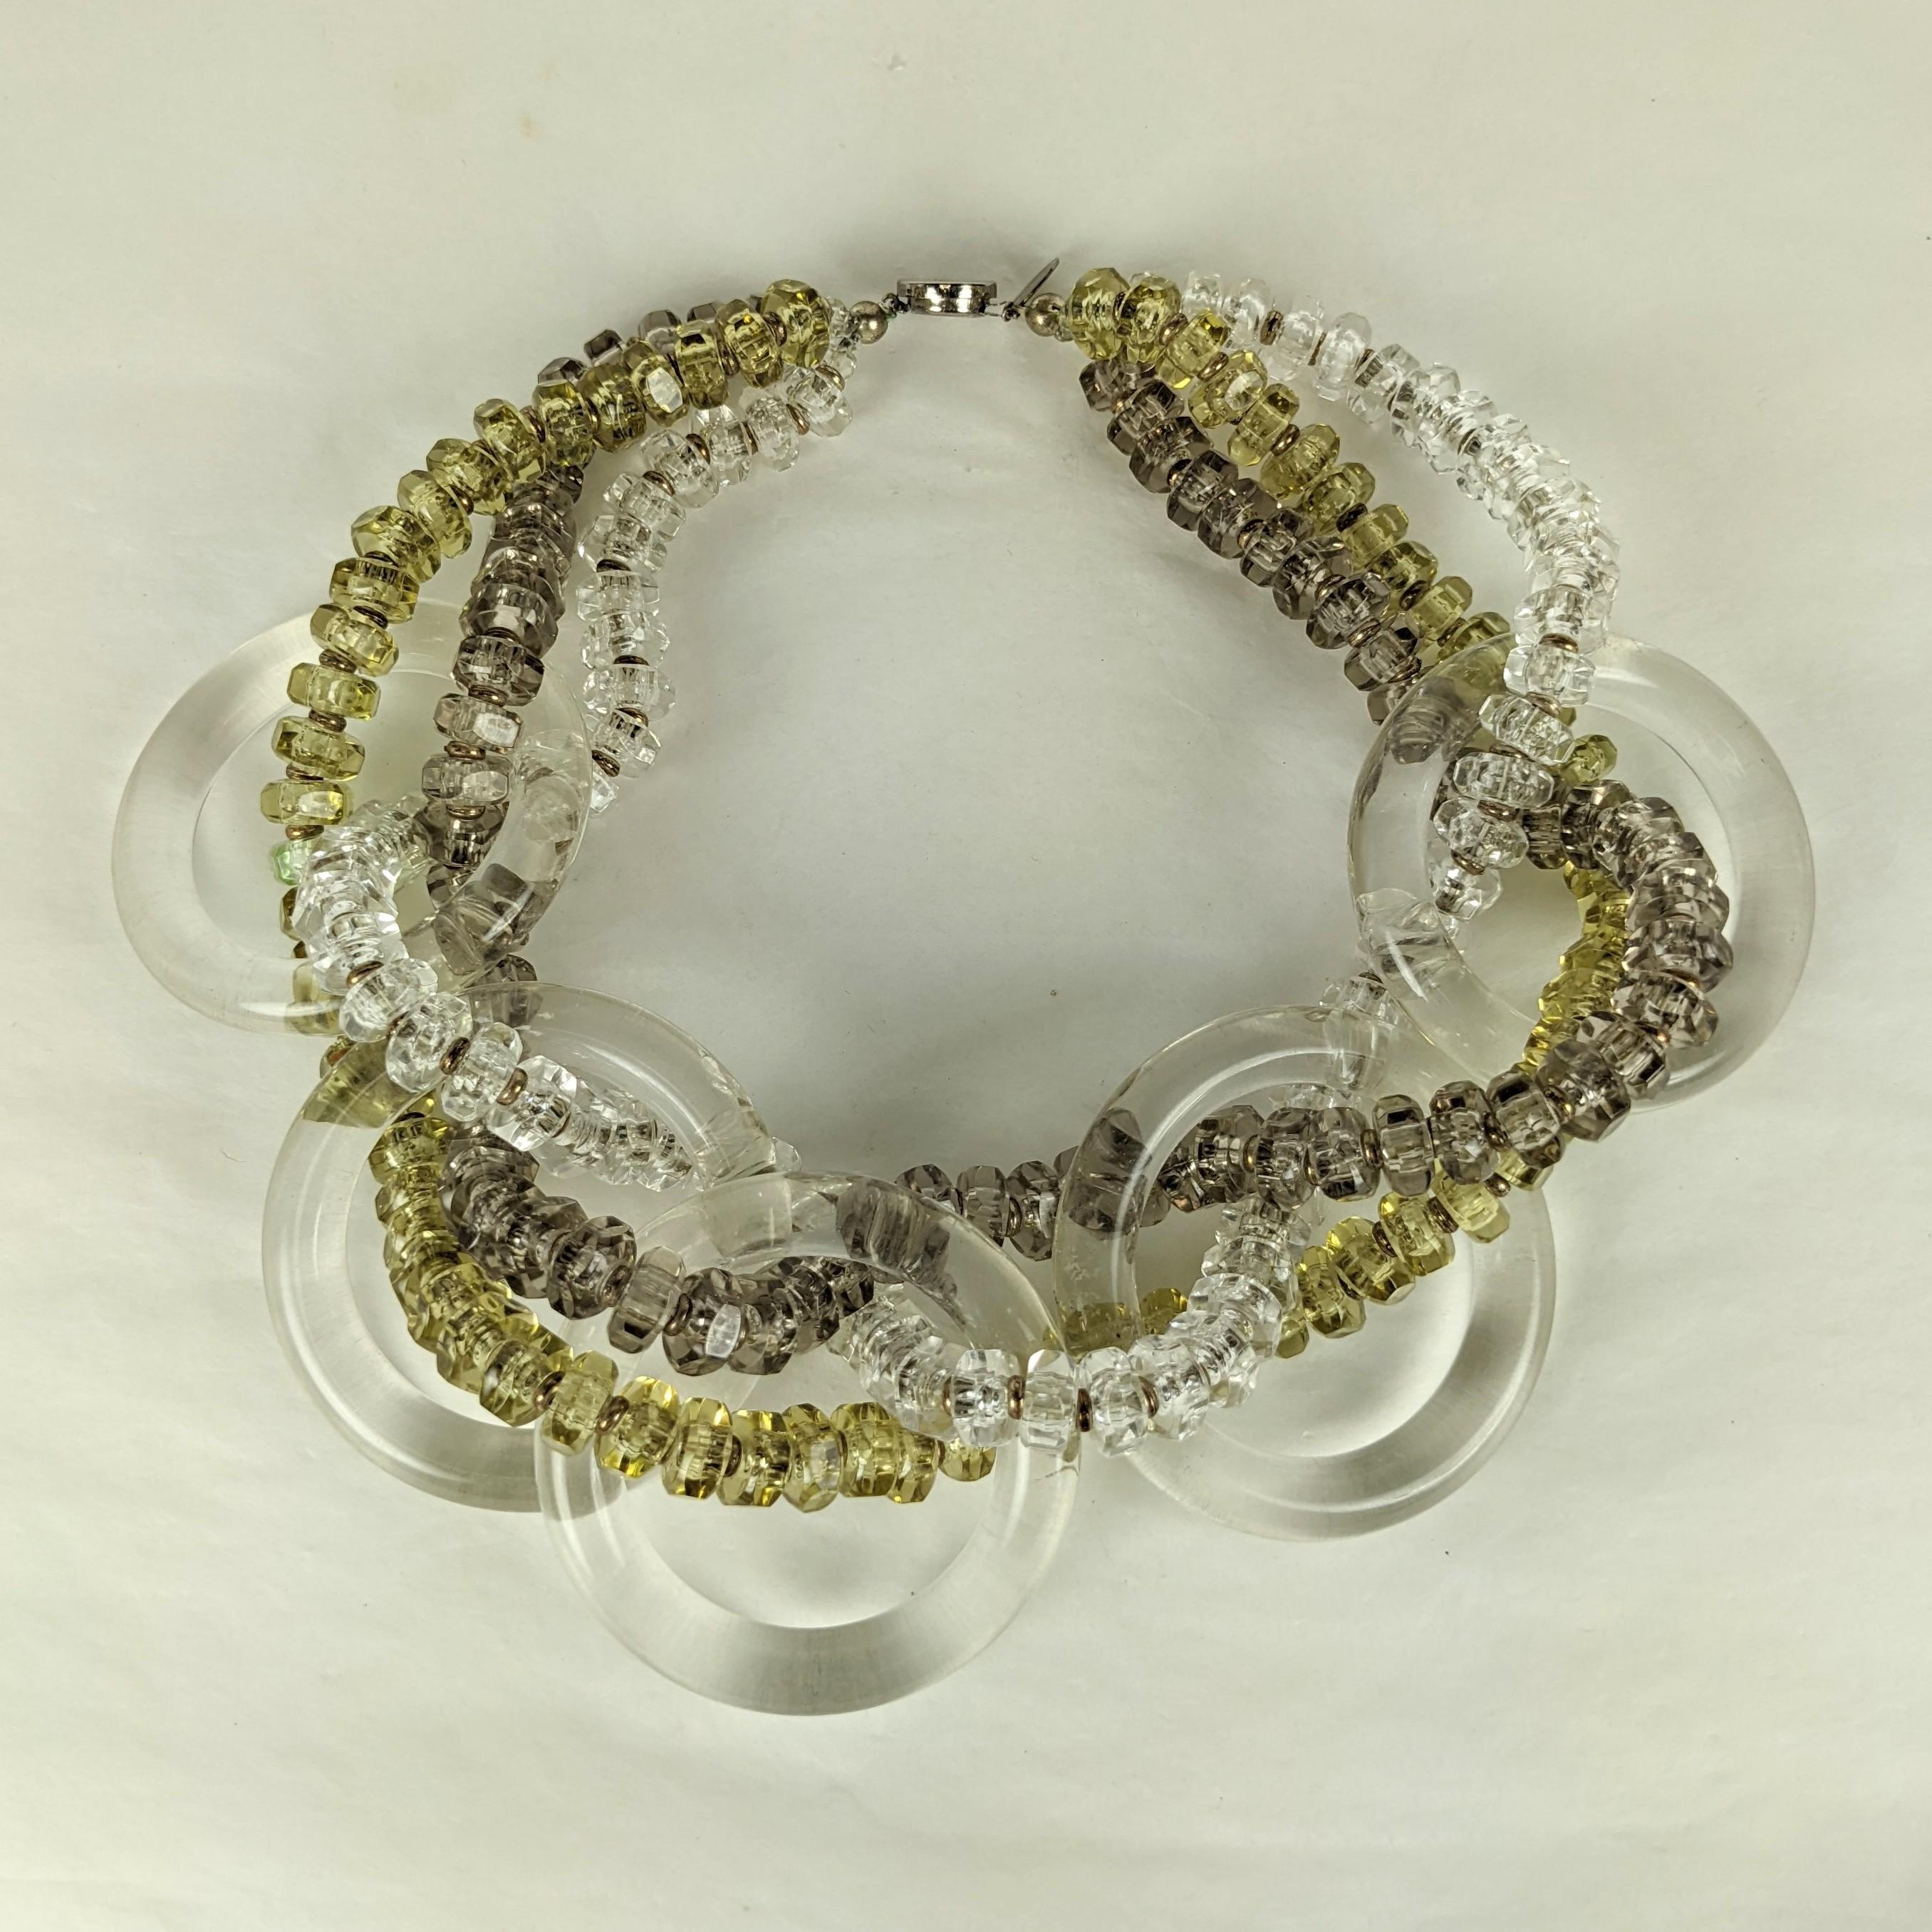 Fun Miriam Haskell Lucite Hoop Statement Necklace from the 1960's braided with crystal, pale olivine and pale smoke colored lucite beads with gilt metal spacers. Imposing scale and design. Signed Miriam Haskell. 1960's USA.  15.5